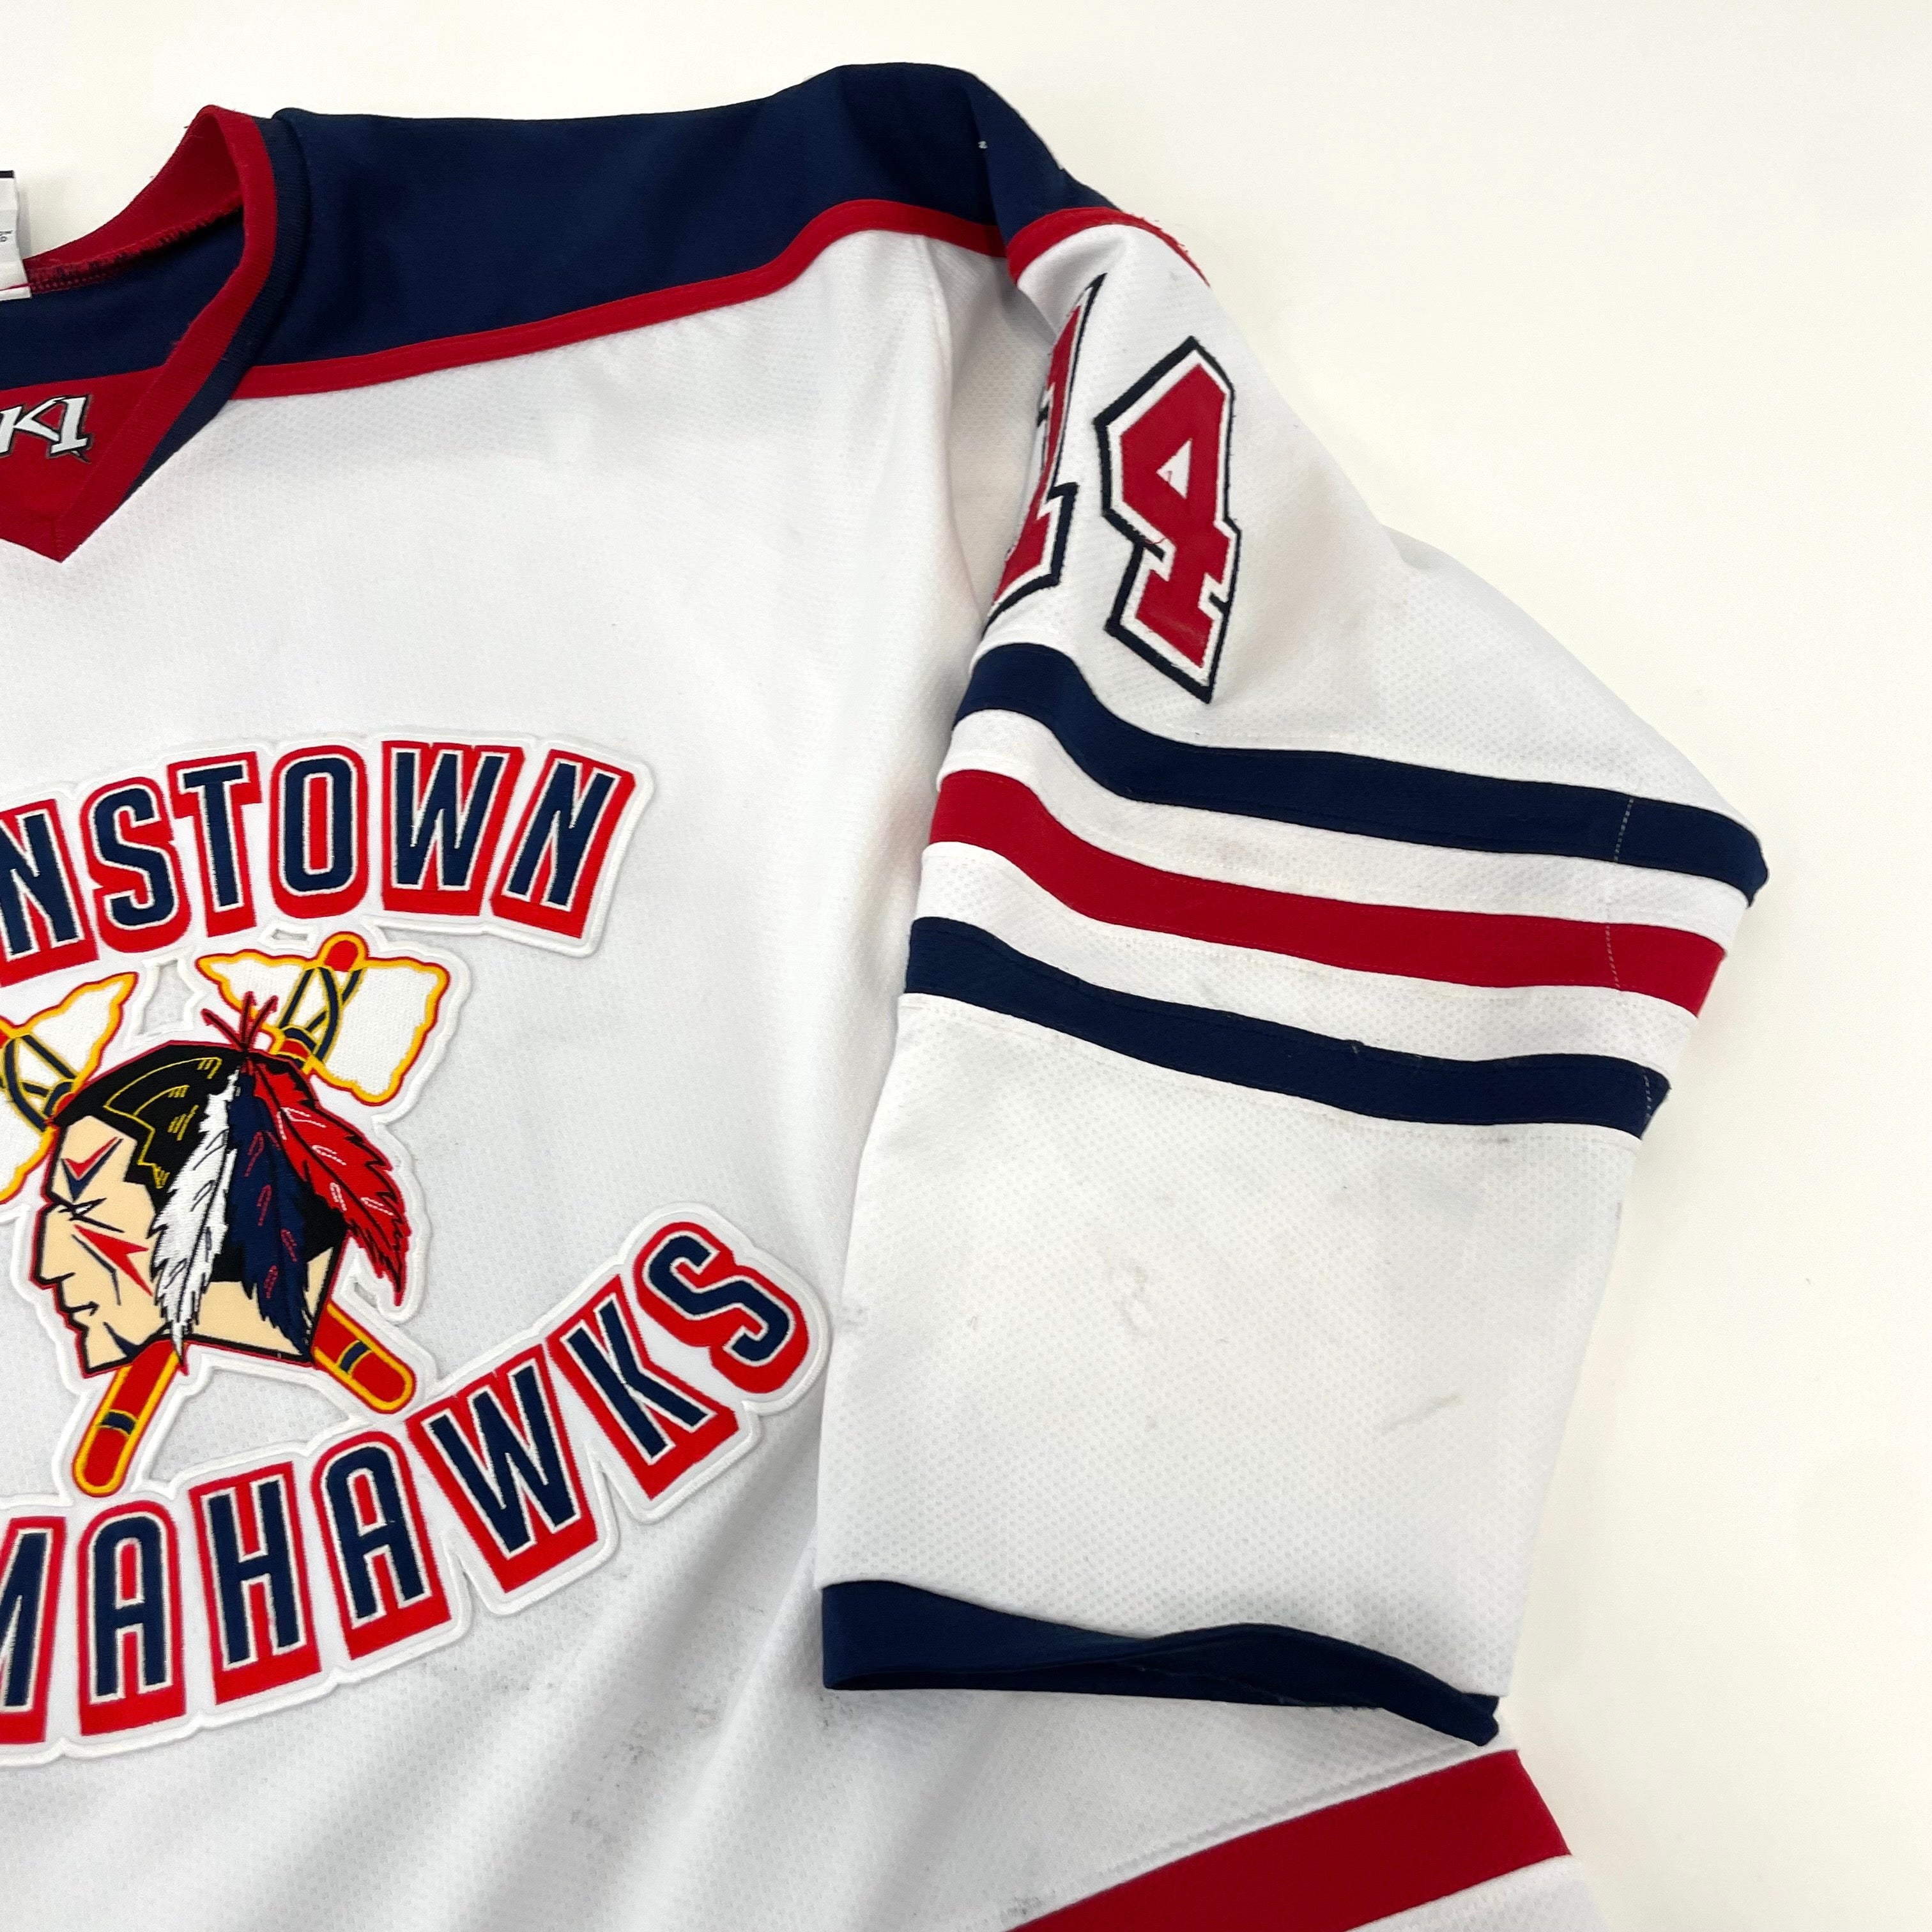 Red Johnstown Tomahawks Game Jersey, Size XL, #22 McQuade